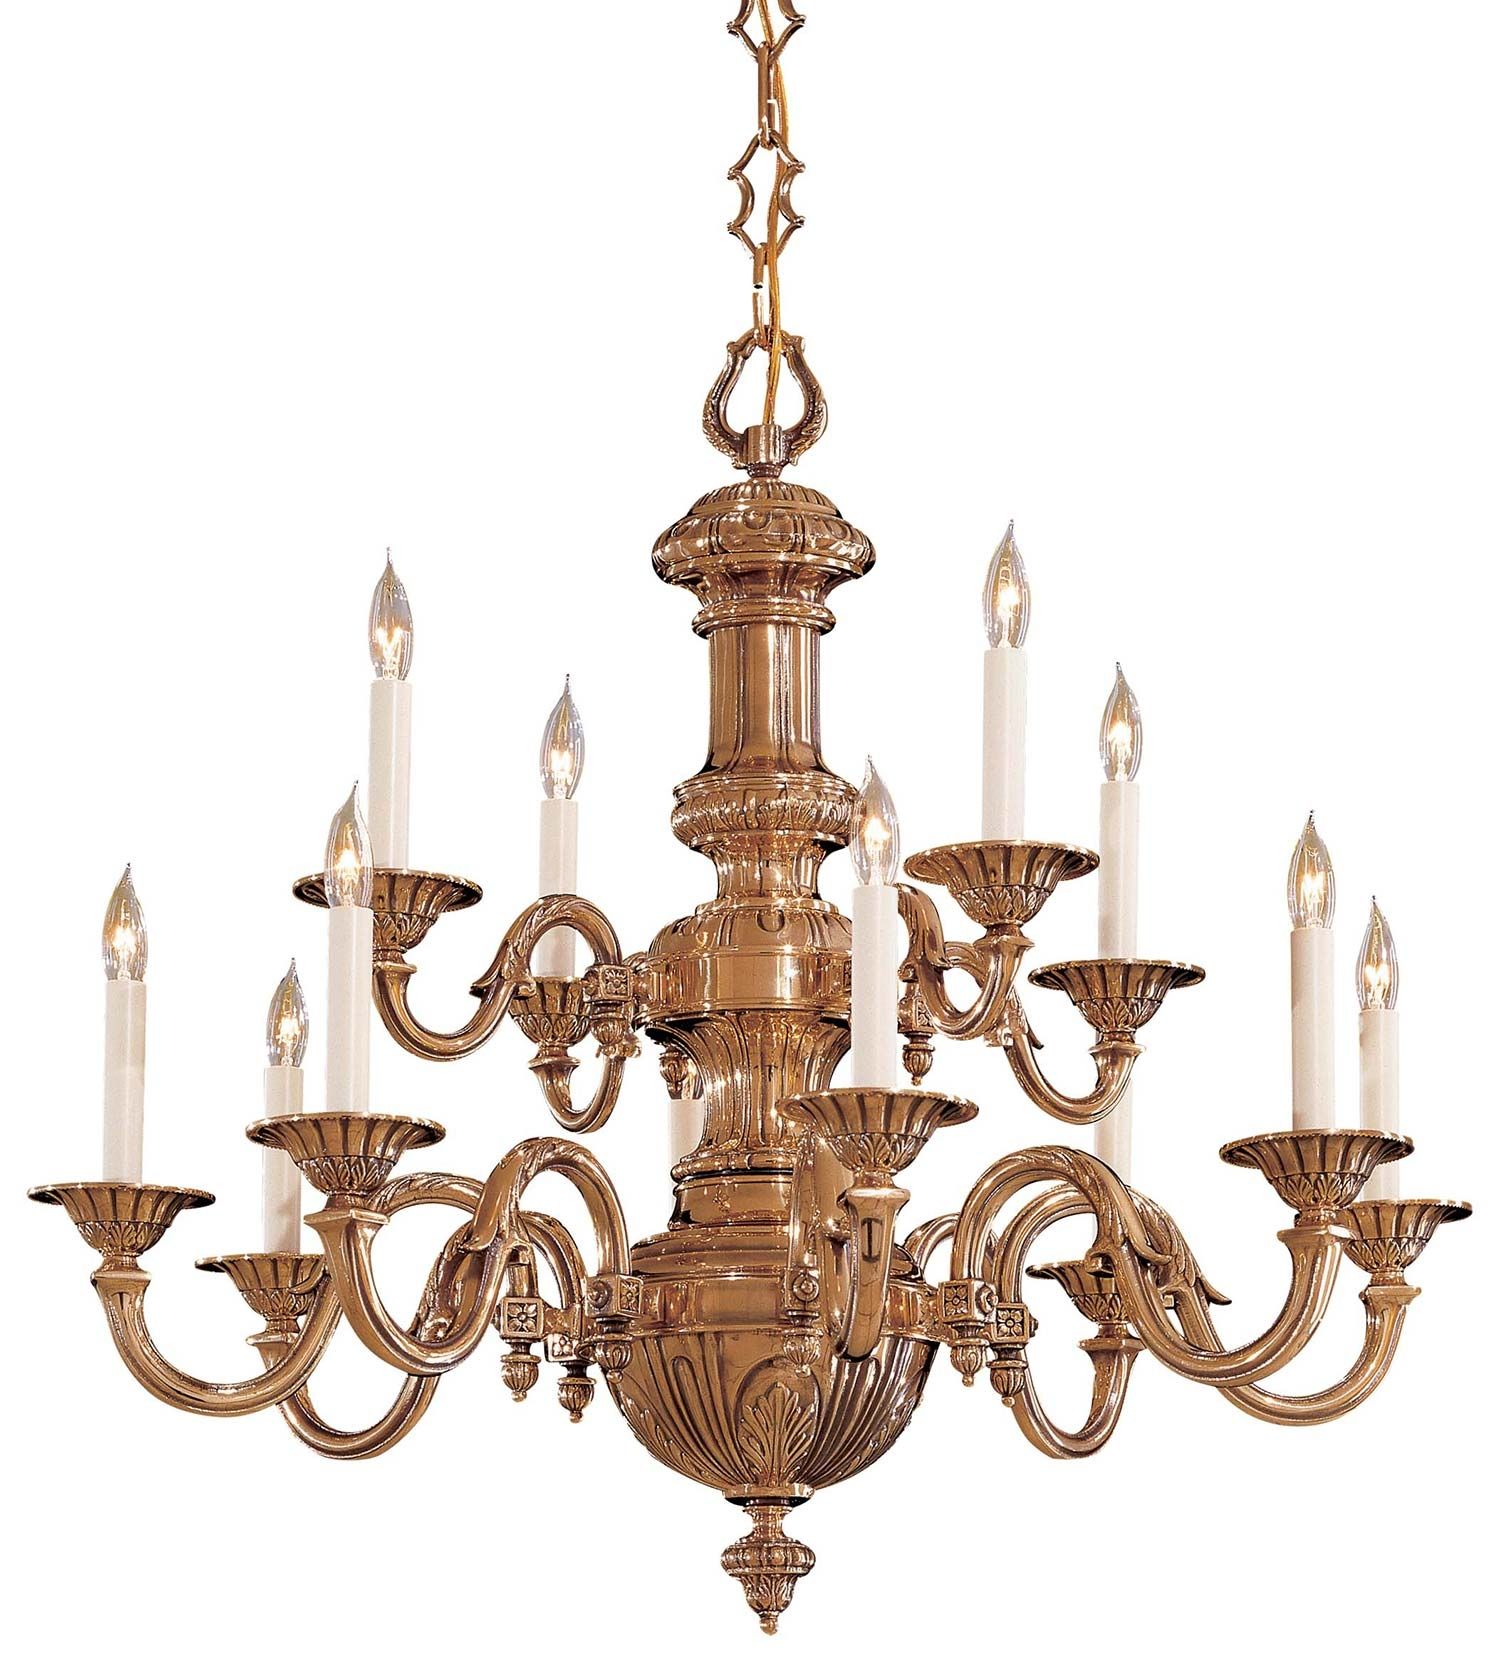 Vintage Chandeliers Best Design News For Vintage Chandeliers (View 10 of 12)